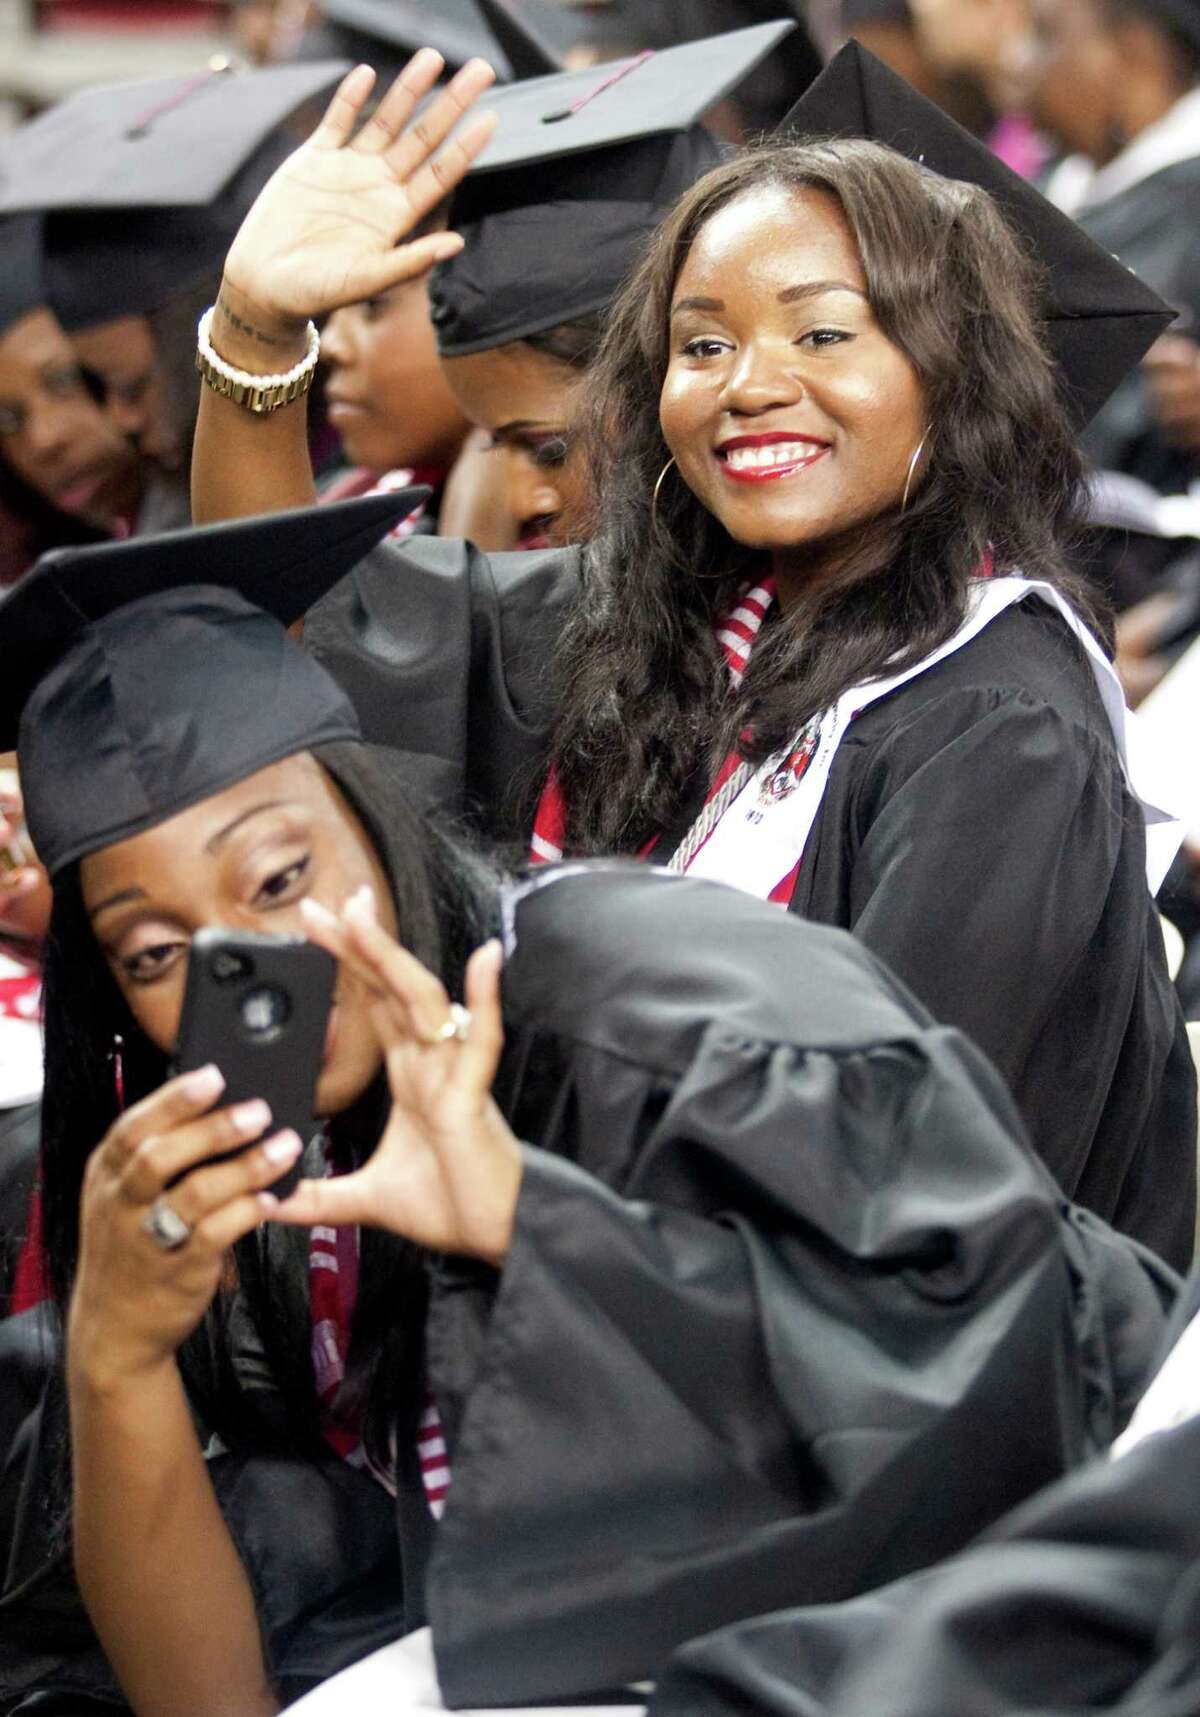 Kim Roberts takes a picture while Jylise Smith waves to friends during graduation ceremonies at Texas Southern University on Saturday, May 12, 2012 in Houston, Texas.